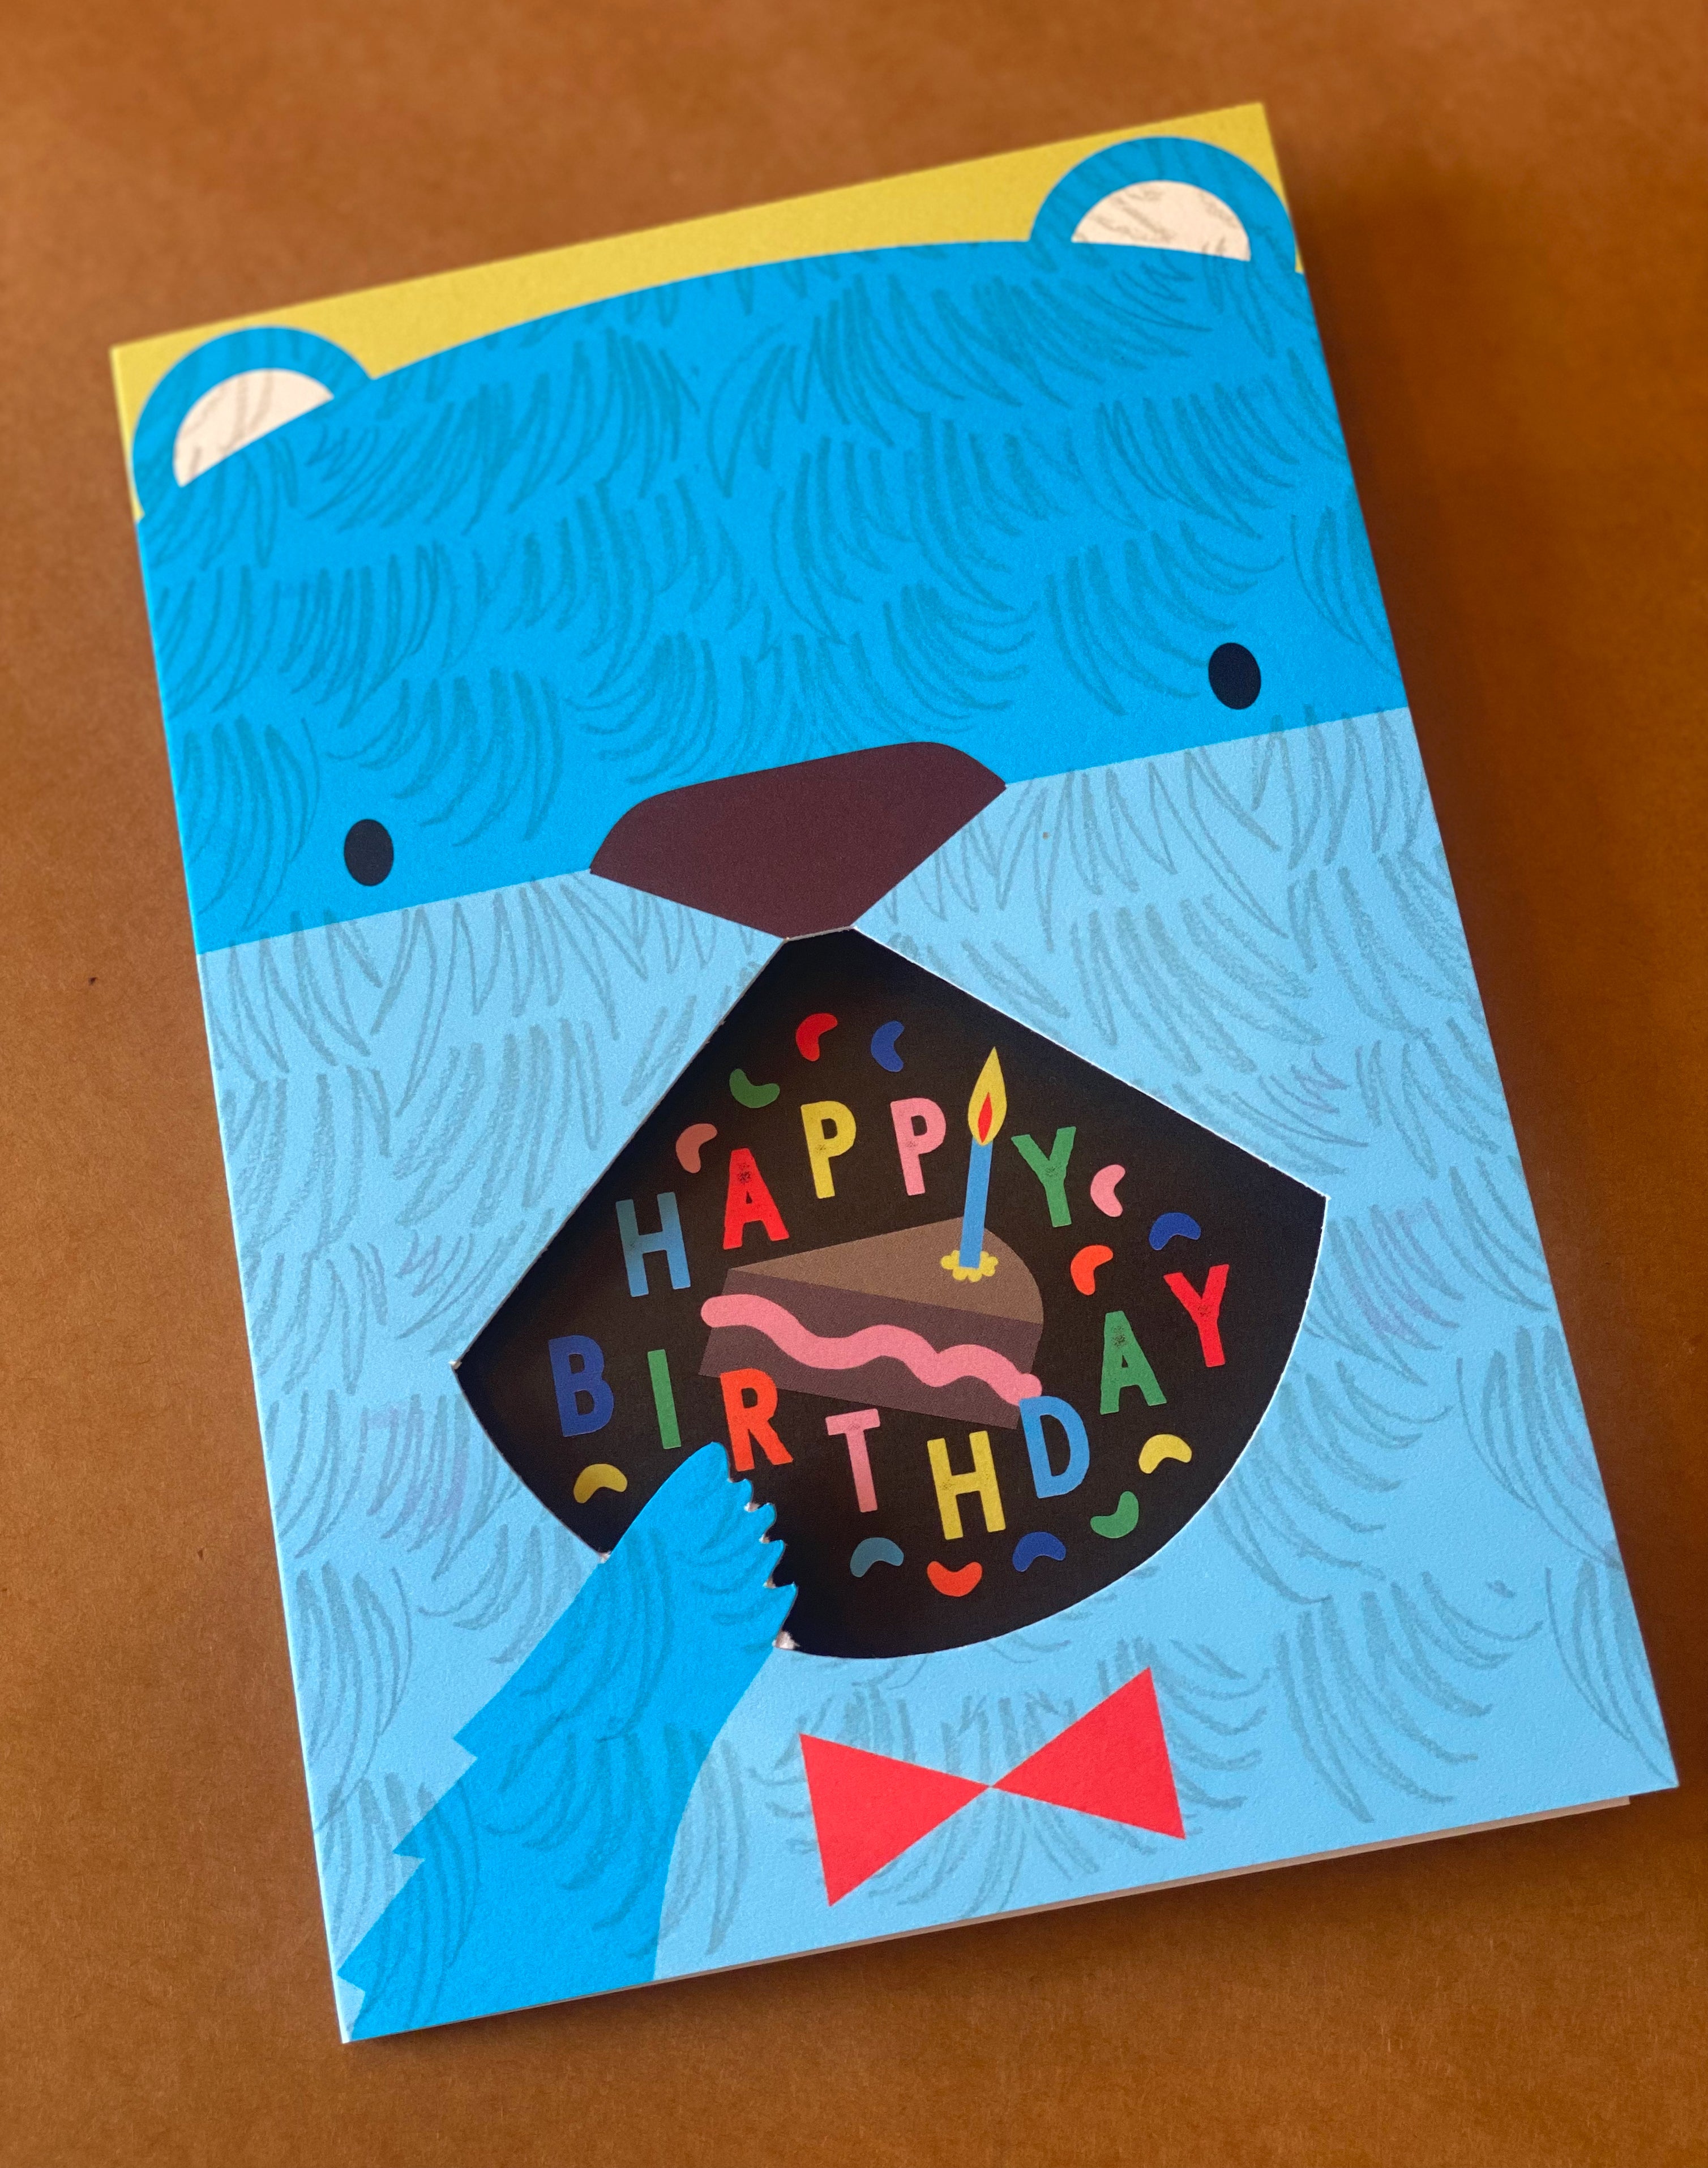 Bear Eating Cake kids Birthday Card with cut-out mouth